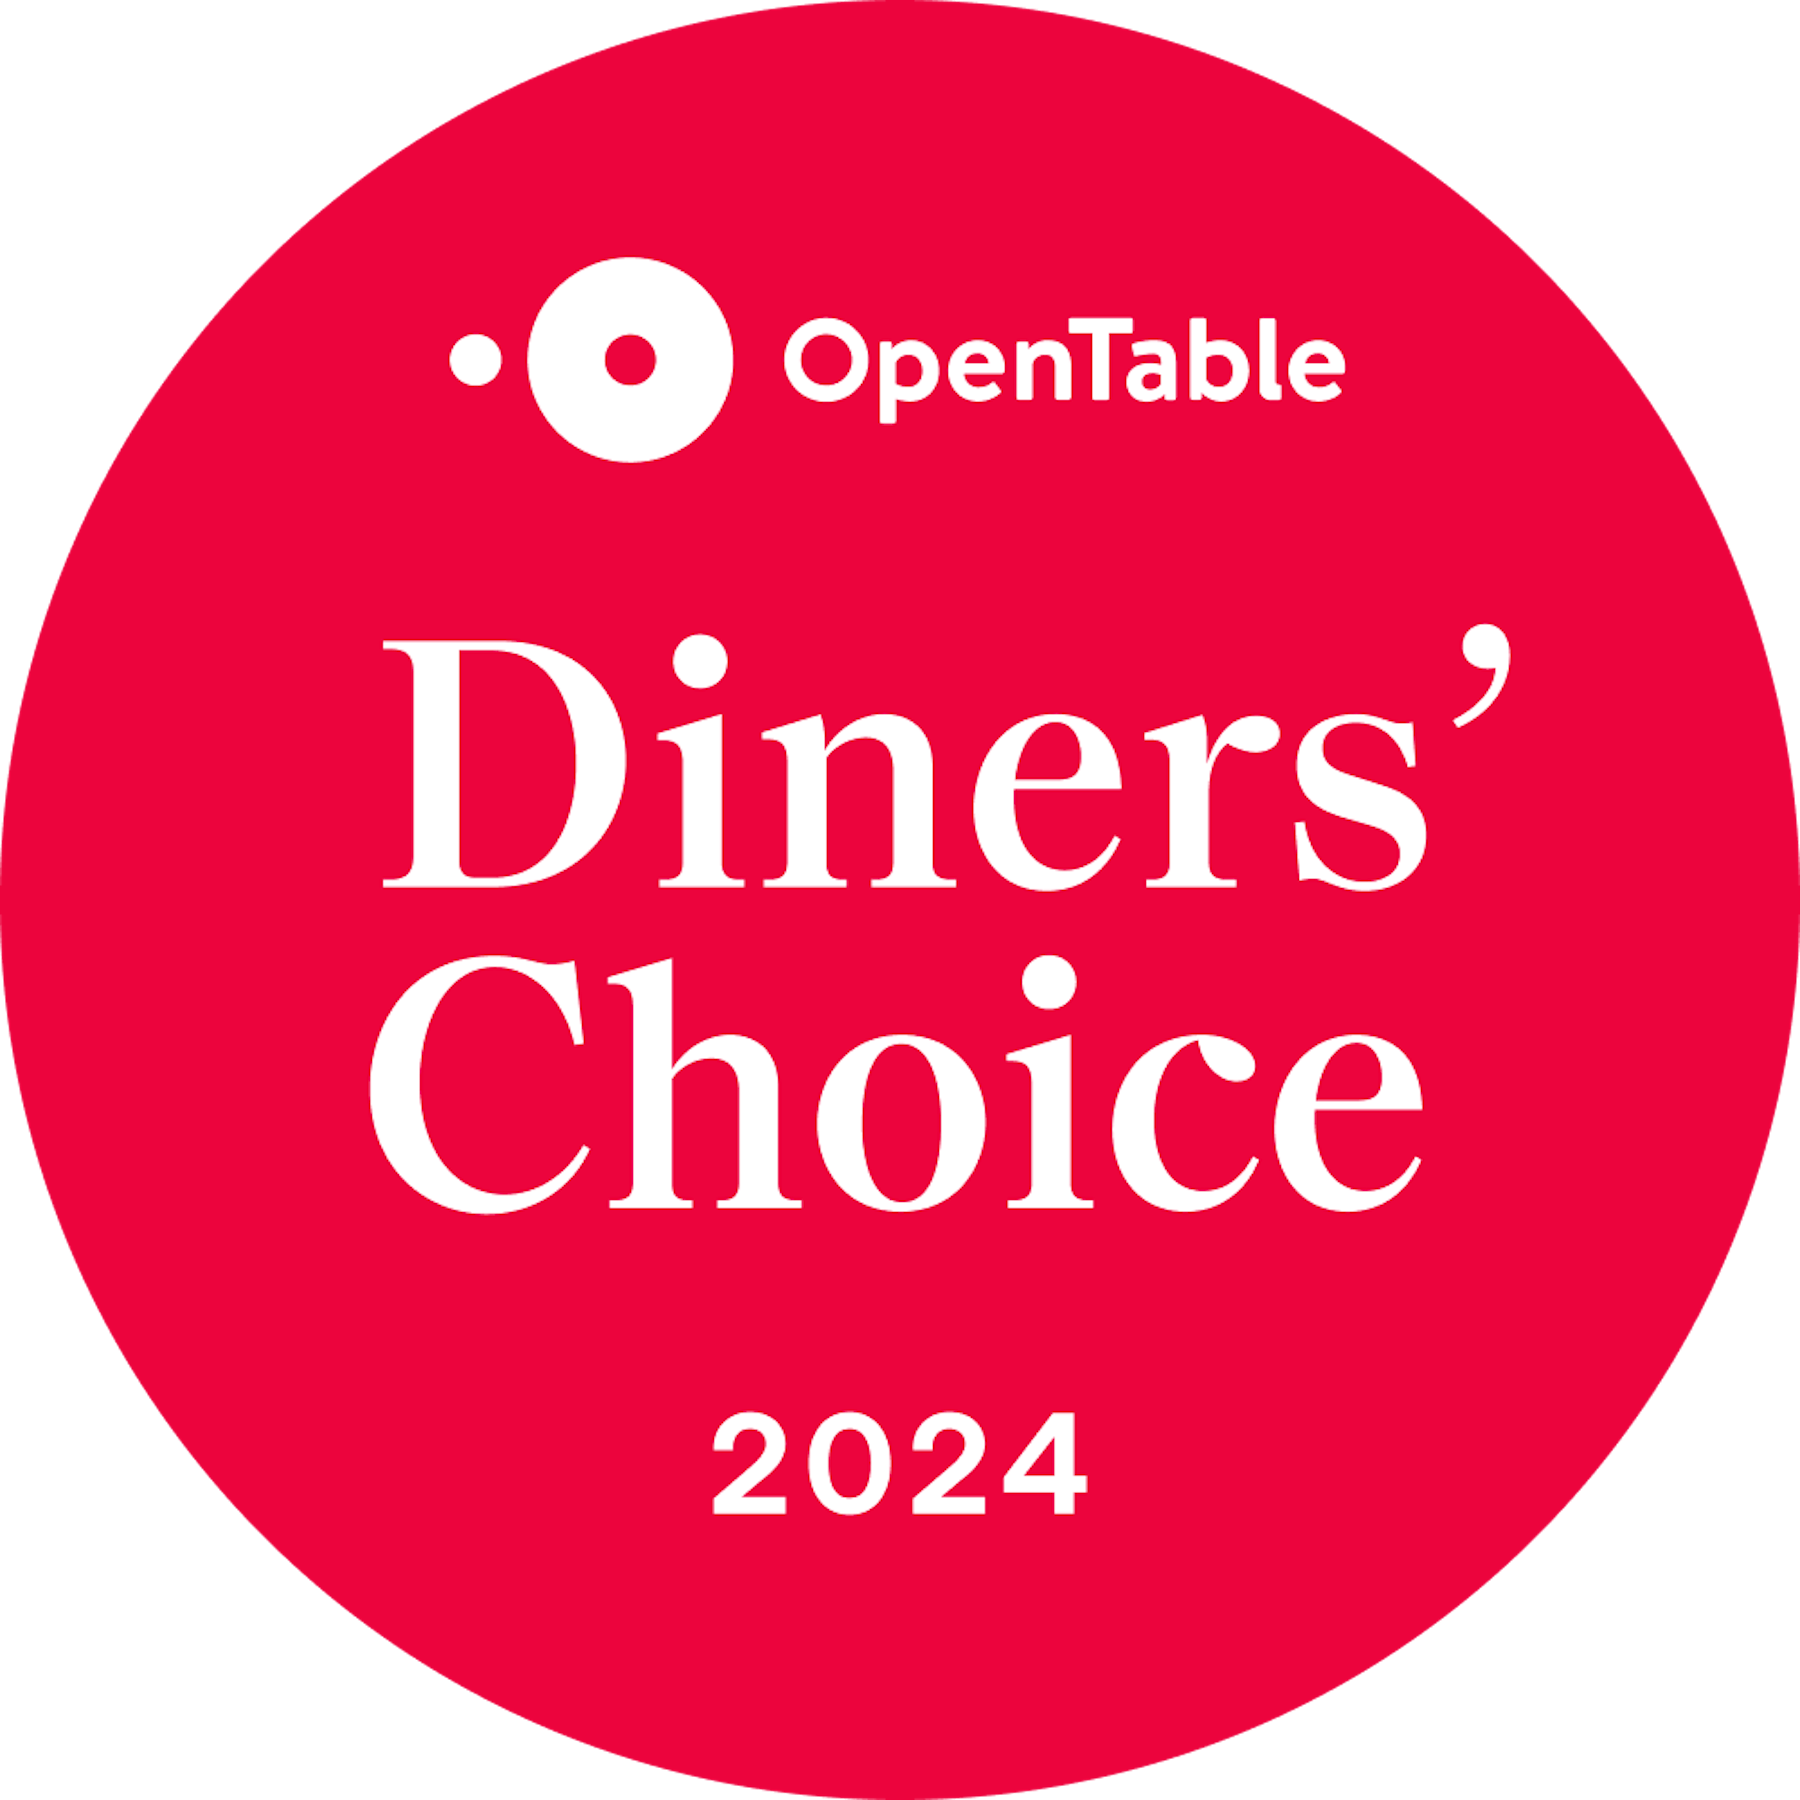 Image of the Open Table Diners' Choice Award 2024, featuring a sleek, modern design with bold text highlighting the year 2024. The award symbolizes excellence in dining, as chosen by Open Table users for exceptional restaurant experiences.